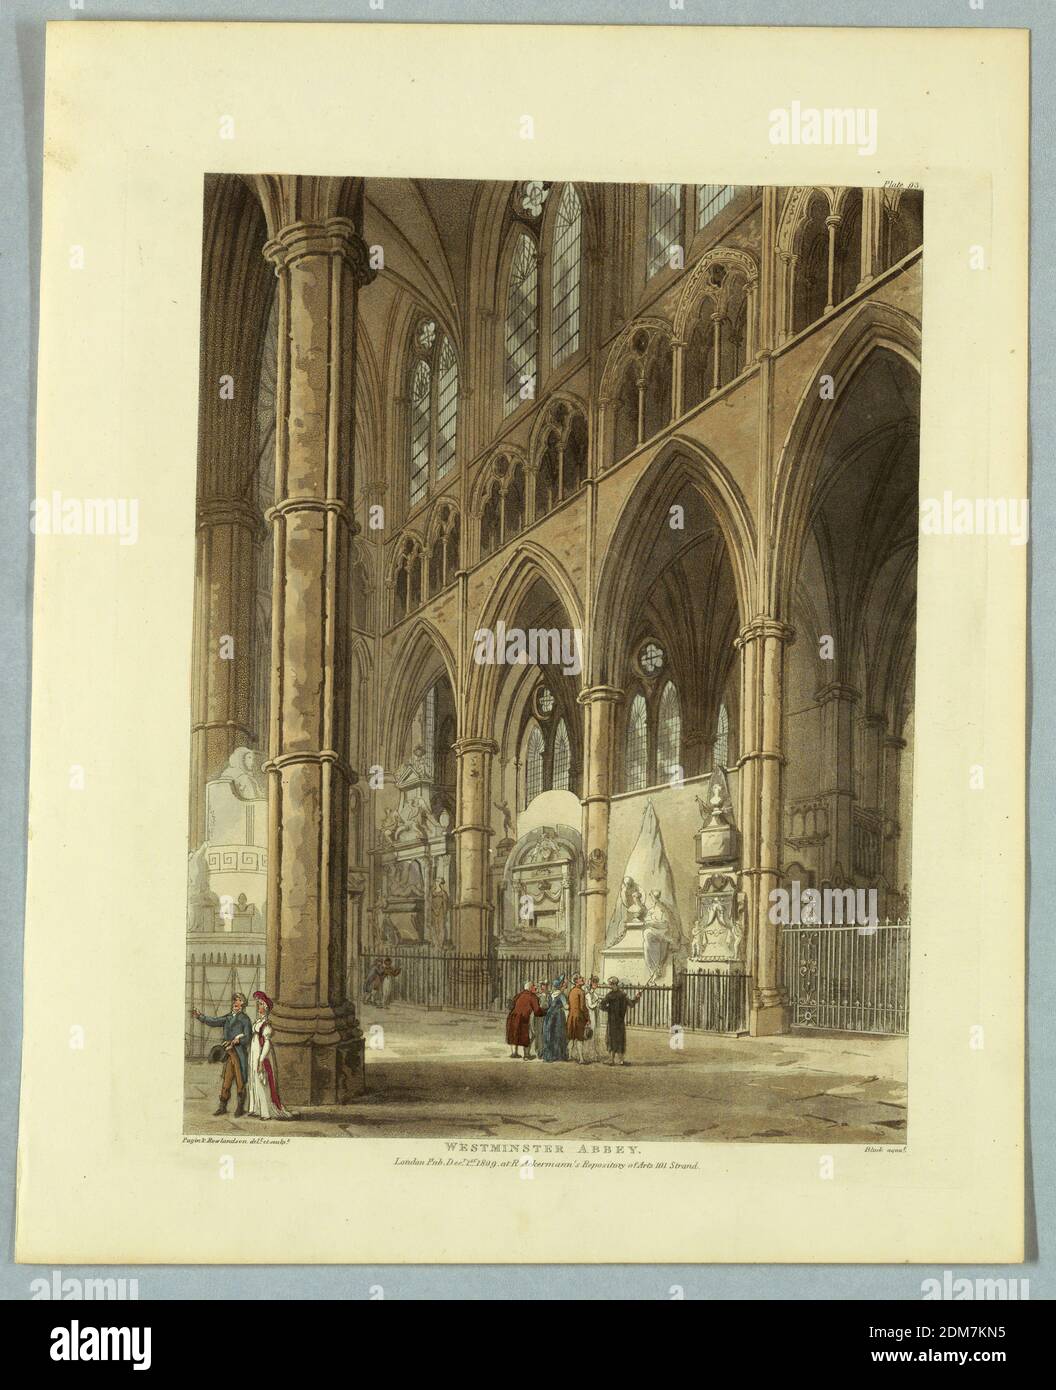 Westminster Abbey, from 'Ackermann's Repository', Thomas Rowlandson, British, 1756–1827, Augustus Charles Pugin, French, active Great Britain, ca. 1762–1832, John Bluck, British, 1791–1832, Aquatint, brush and watercolor on paper, Church interior with high Gothic arches. Baroque tombs and statues between the pillars. A few sightseers. Title, artists', and publisher's names below., Europe, London, England, 1809, Print Stock Photo